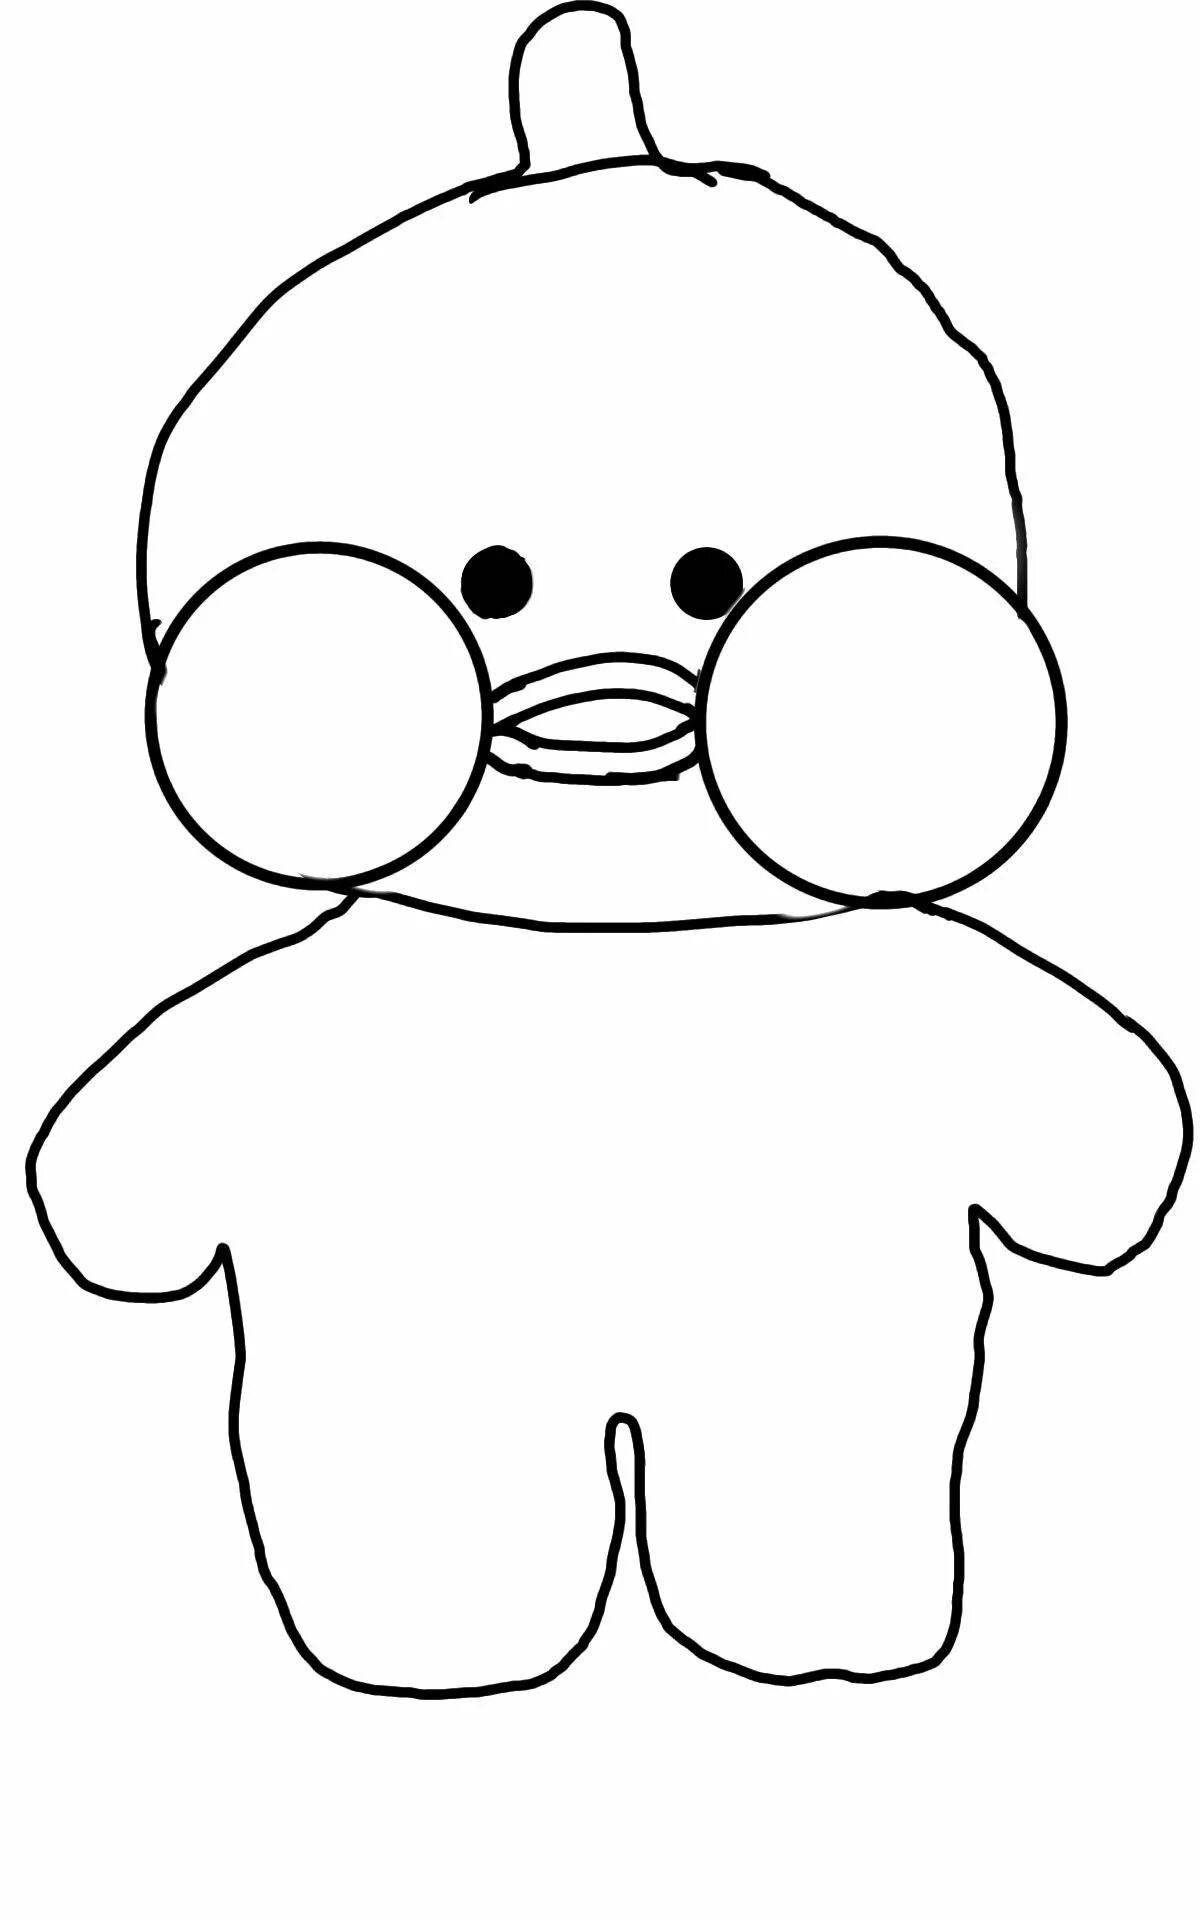 Coloring lalanfant duck coloring page